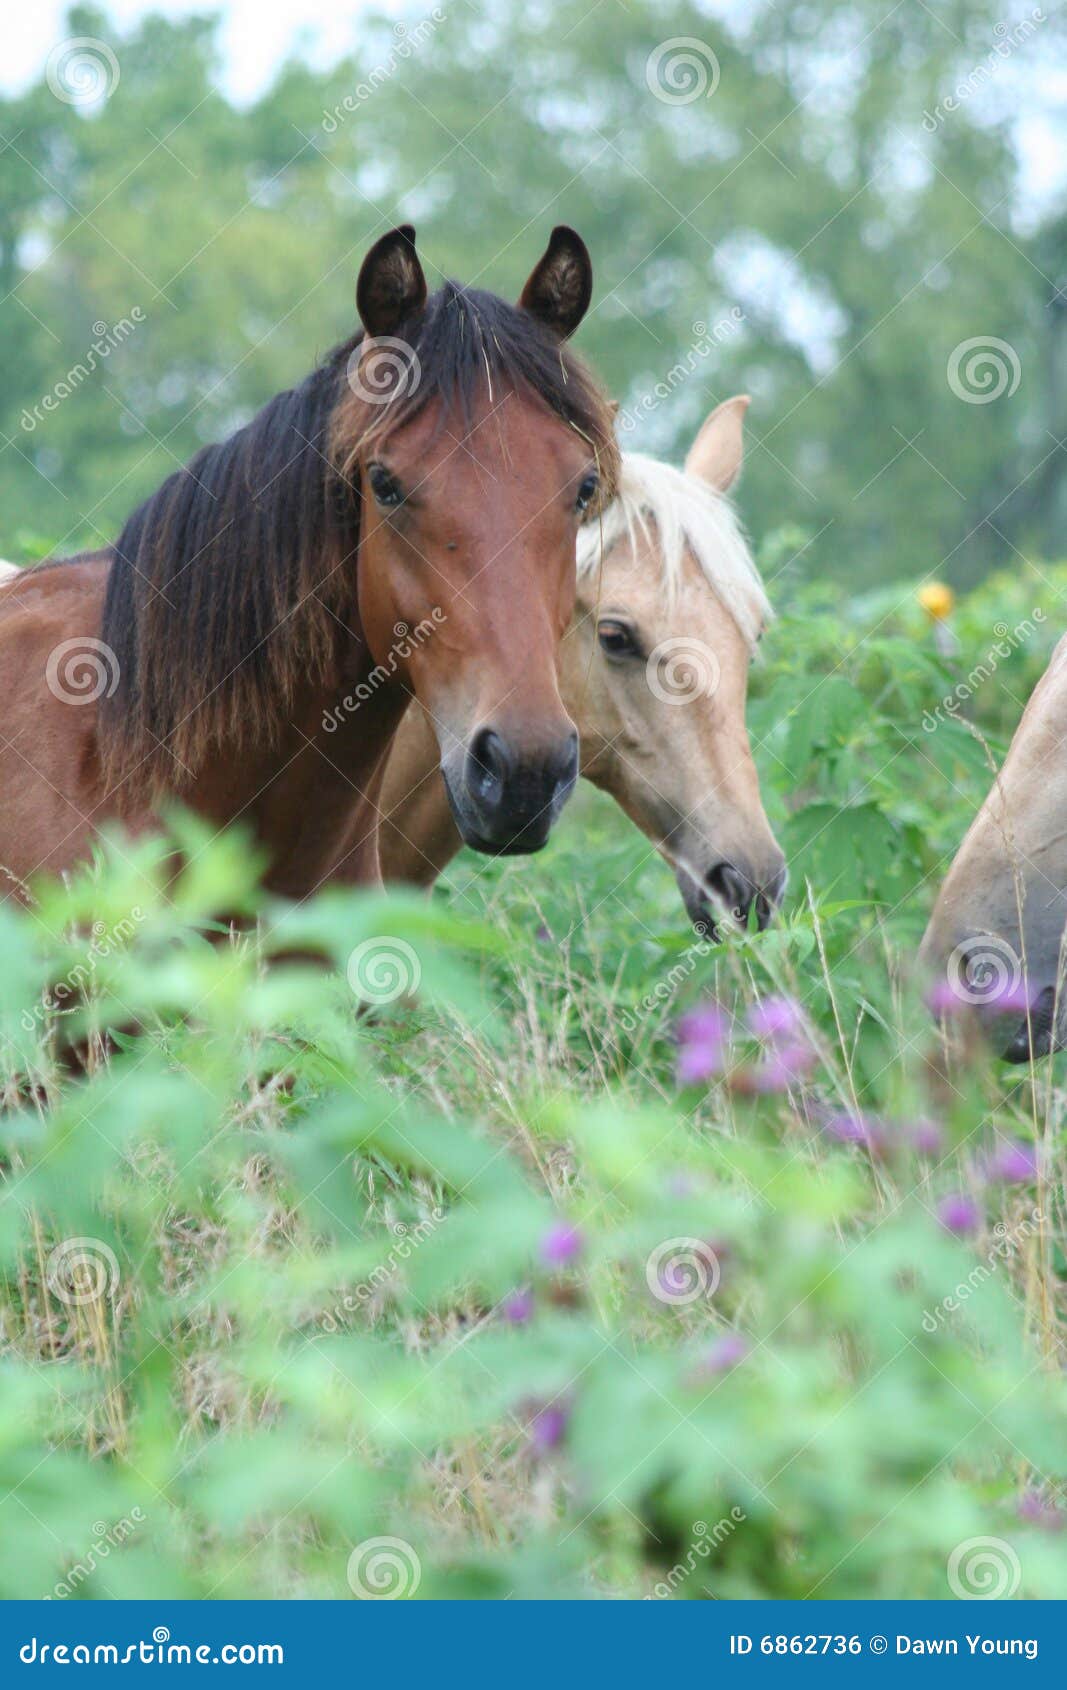 horses stood in countryside